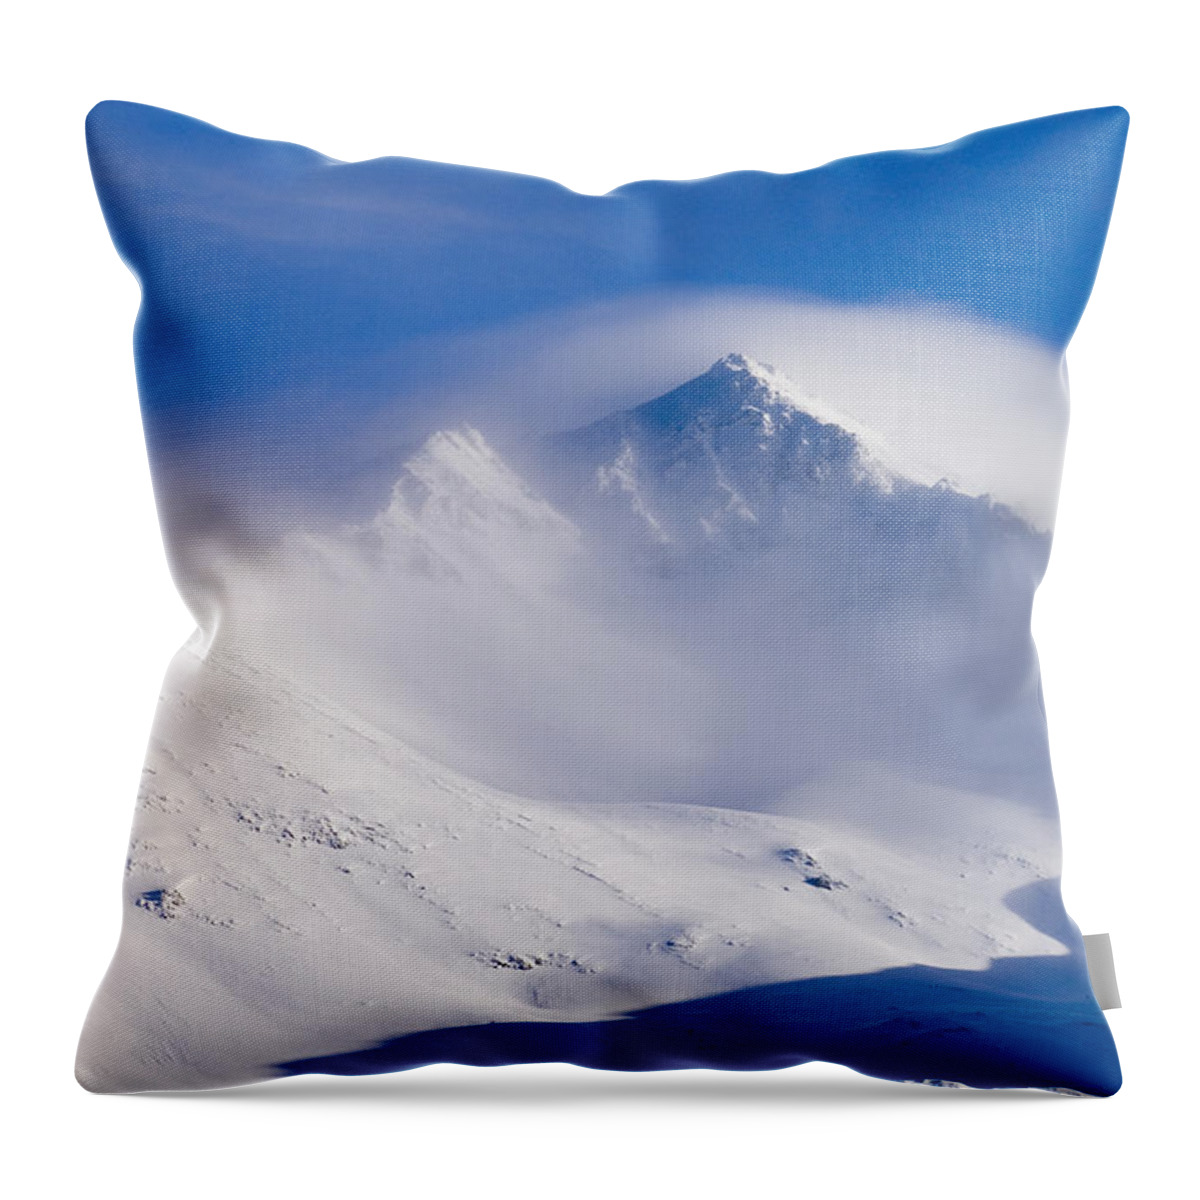 00999093 Throw Pillow featuring the photograph Snow Covered Peaks In The Fog Southeast by Flip Nicklin